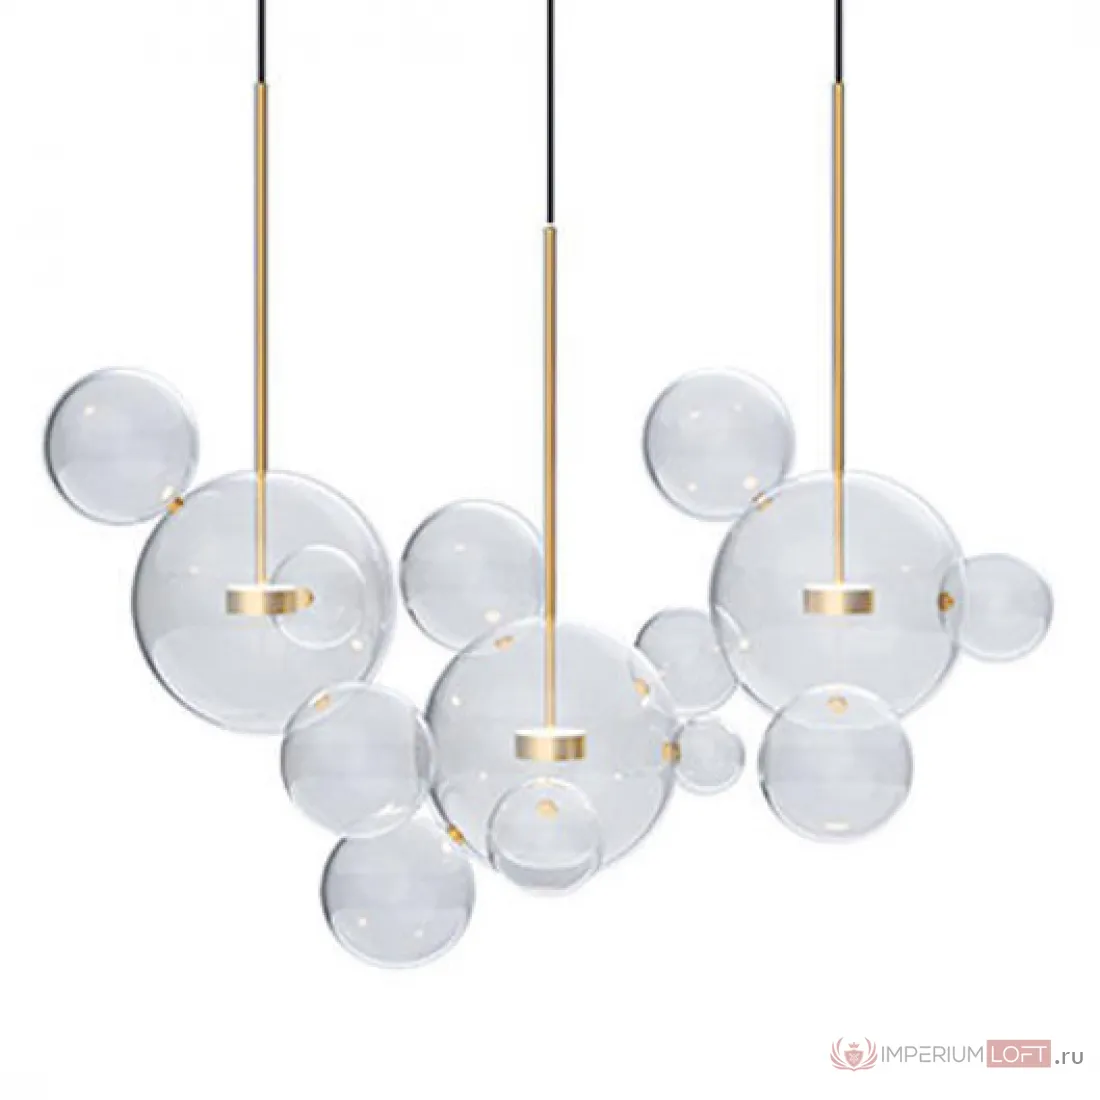 Светильники delight collection. Люстра Delight collection Bolle 3. Подвесной светильник Delight collection Bolle. Люстра Bolle Chandelier. Подвесной светильник Delight collection Melt 9305p Silver.